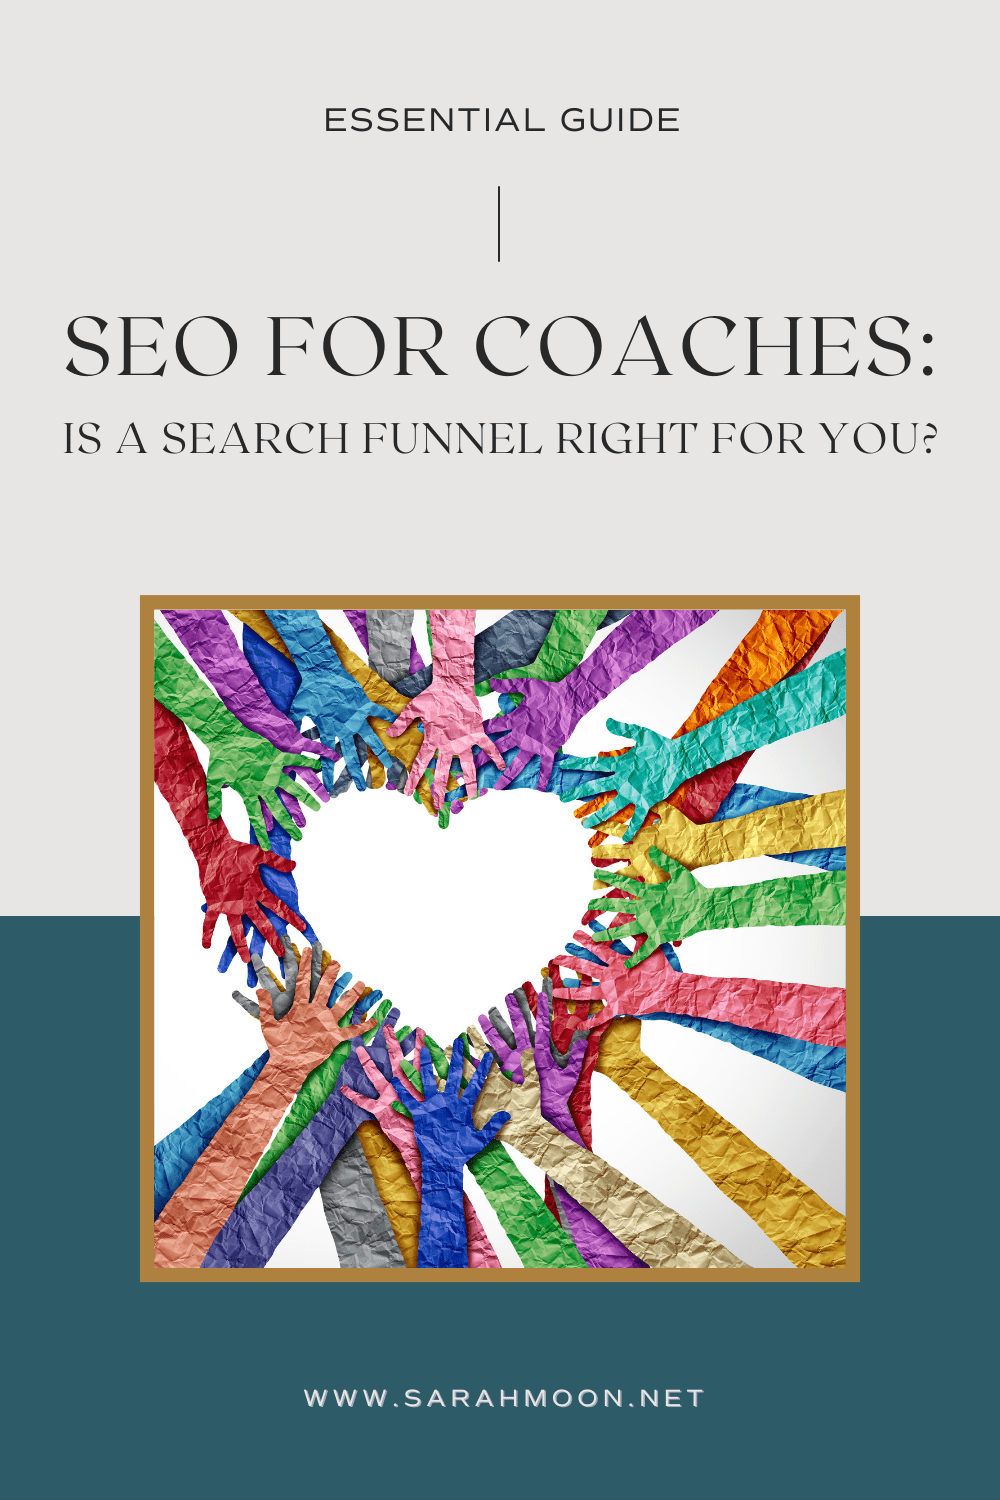 SEO for Coaches - Essential Guide Graphic - Includes Rainbow hands in the photo